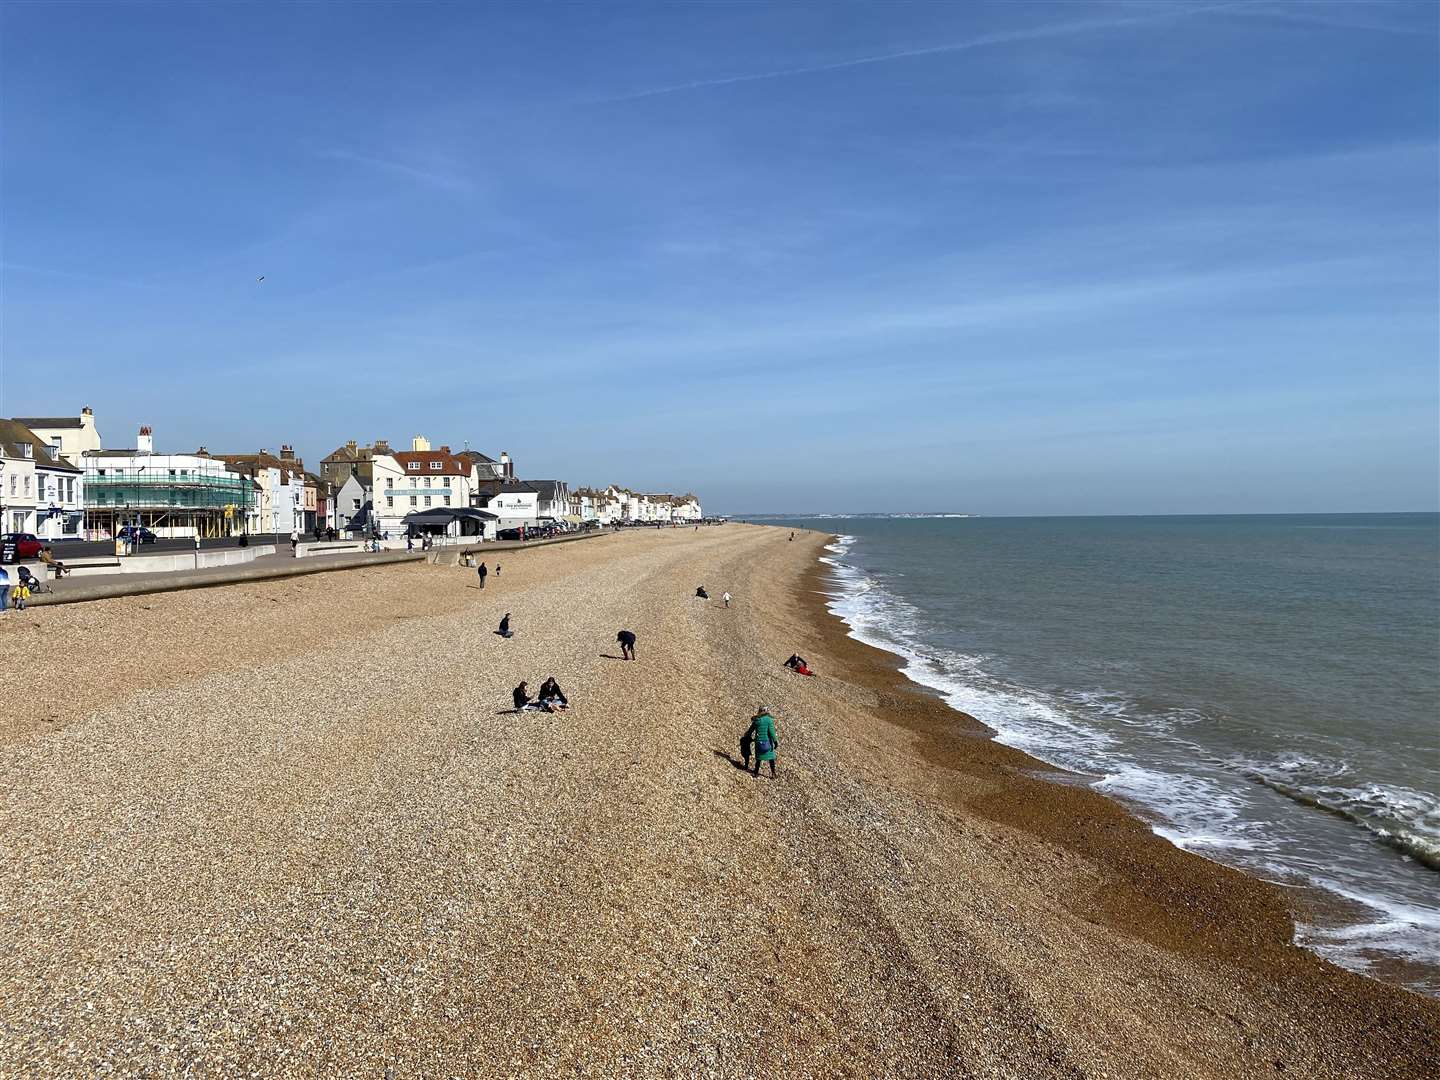 The deer was found on a beach in Deal